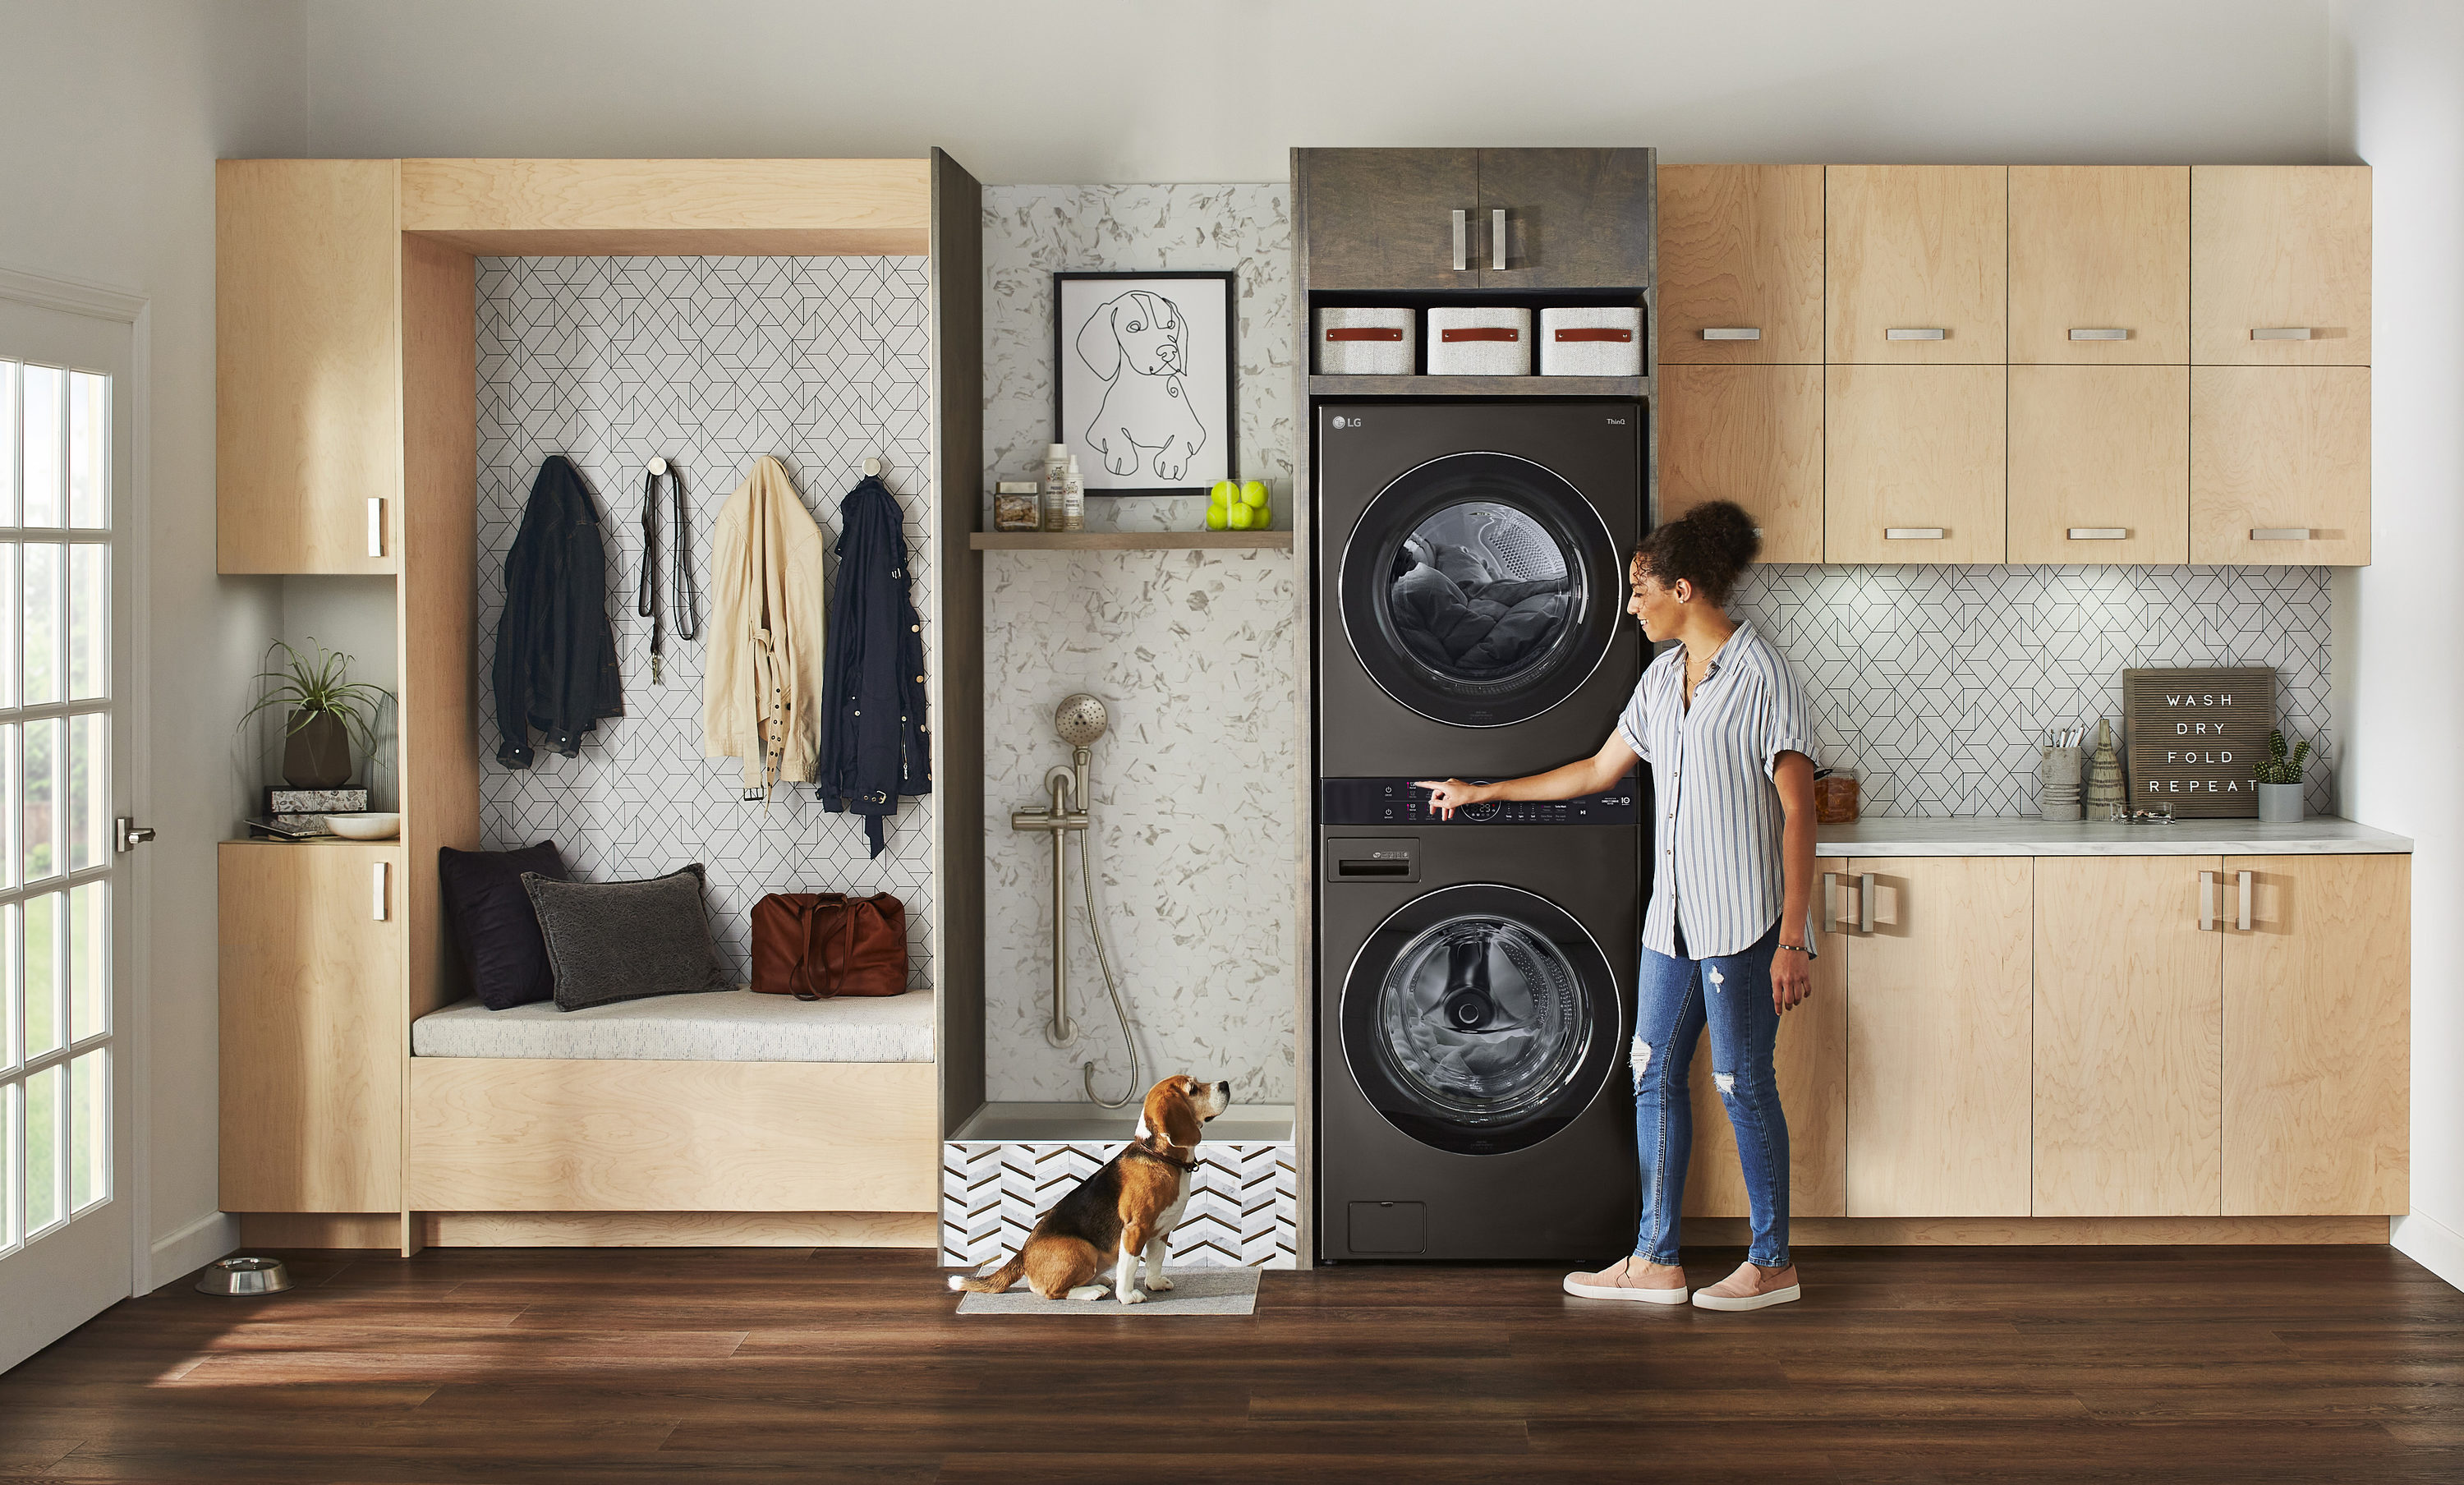 LG WashTower Electric Stacked Center Laundry ft ft and 7.4-cu the in (ENERGY STAR) at Laundry department Washer Dryer 4.5-cu with Stacked Centers